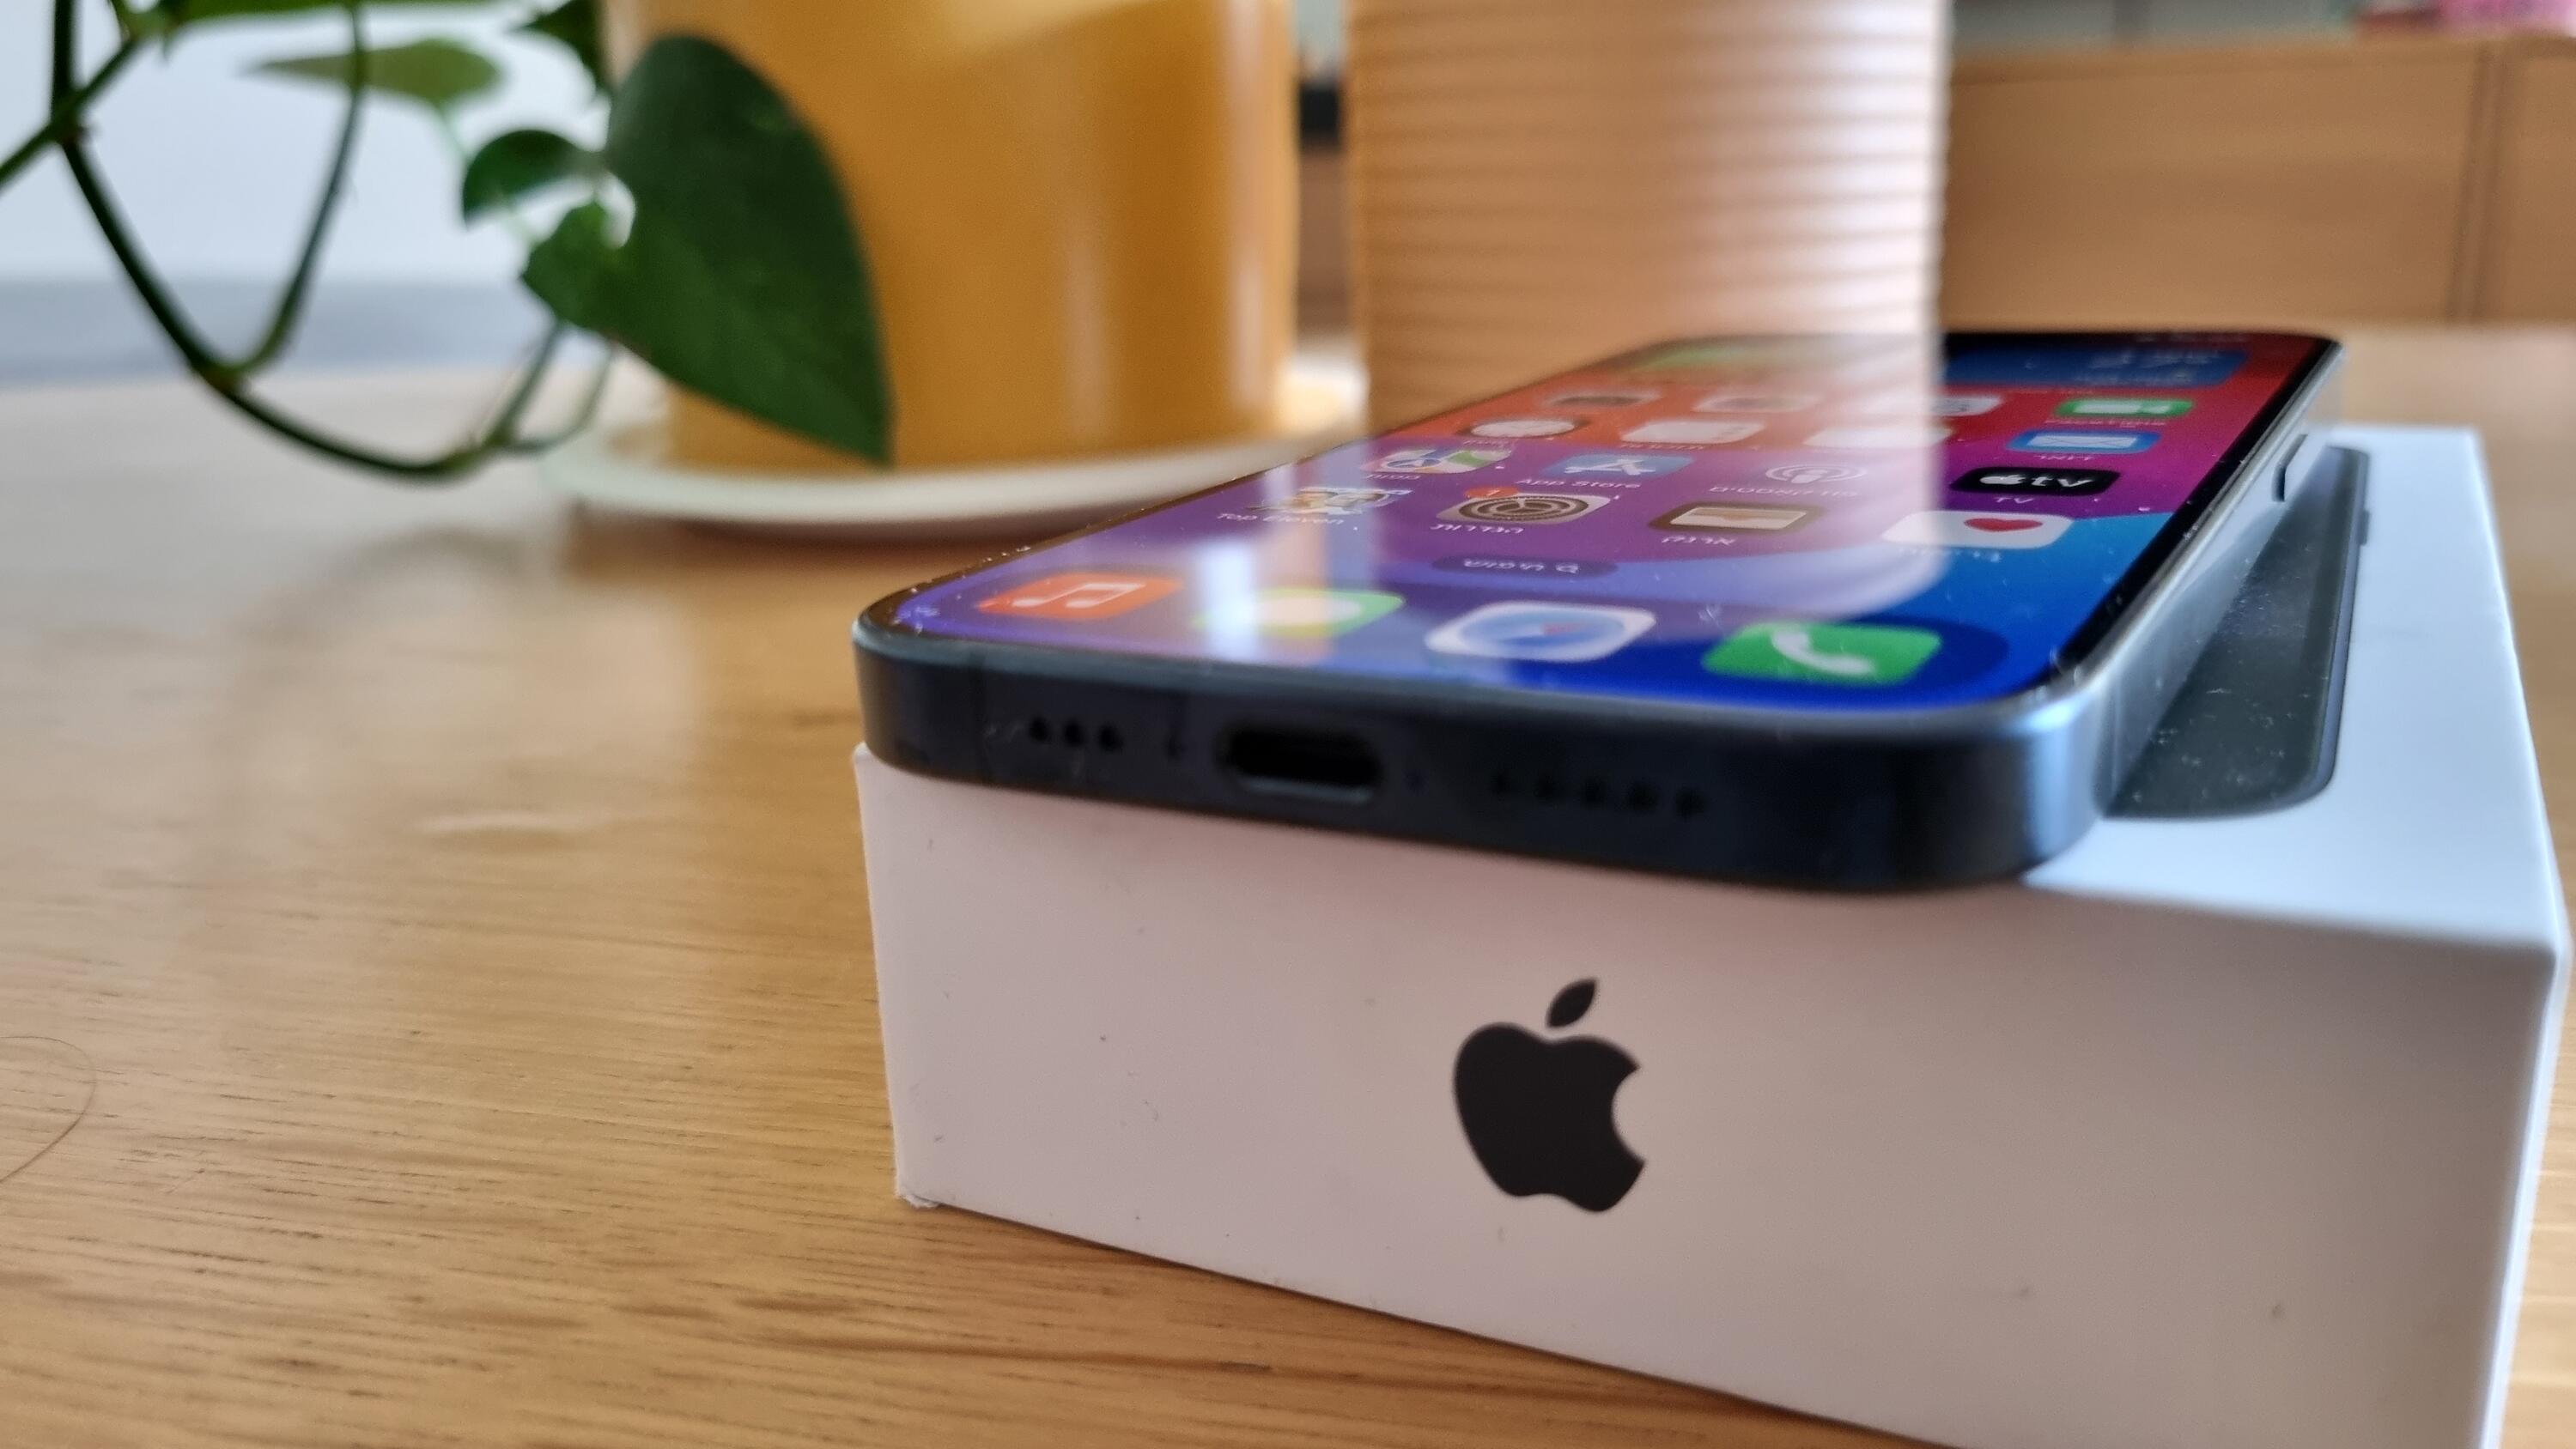 iPhone 15 Pro review: Coming from iPhone 12 Pro or earlier? This upgrade  will wow you